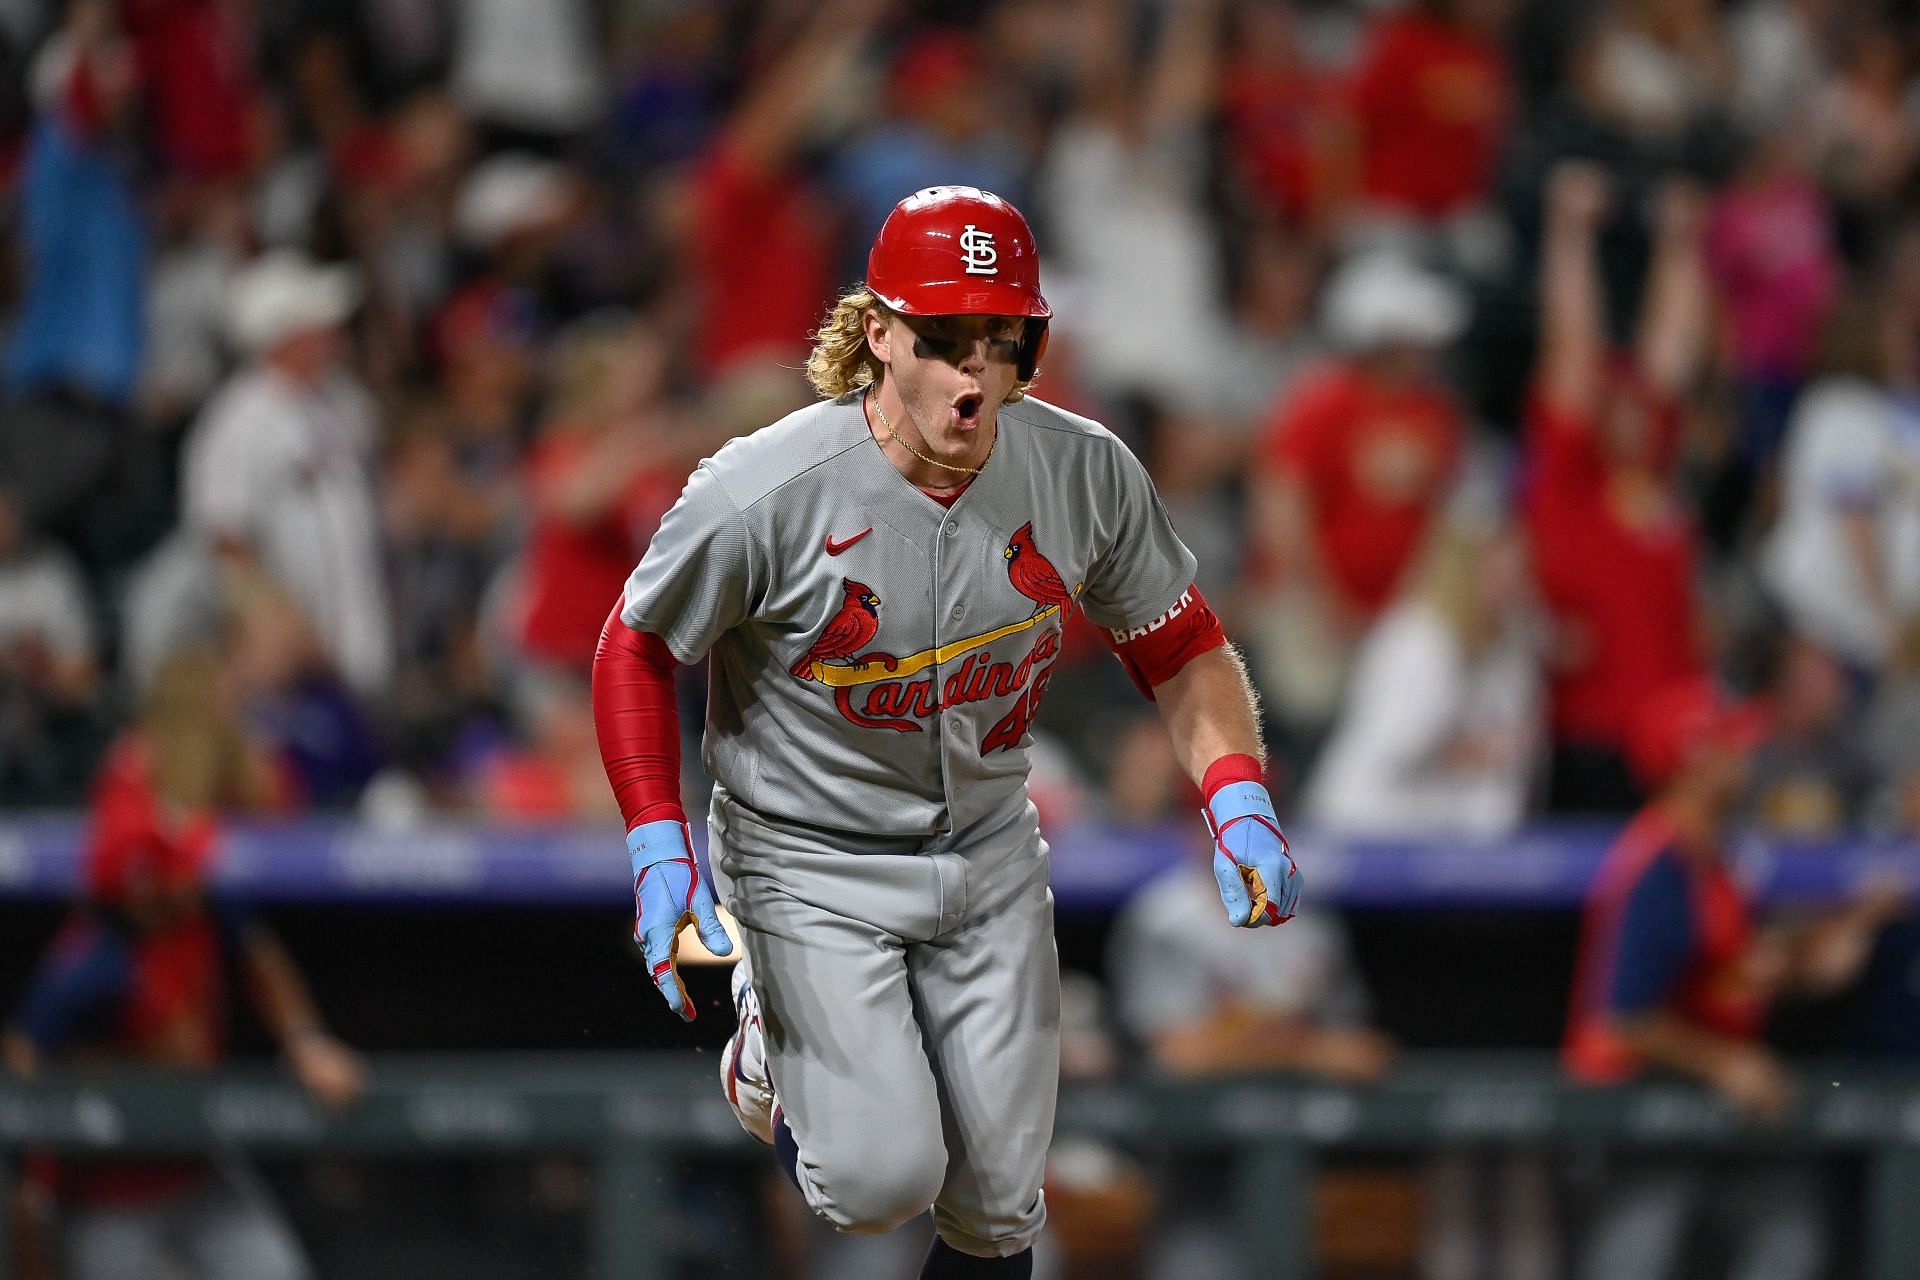 Harrison Bader had a remarkable 2021 campaign